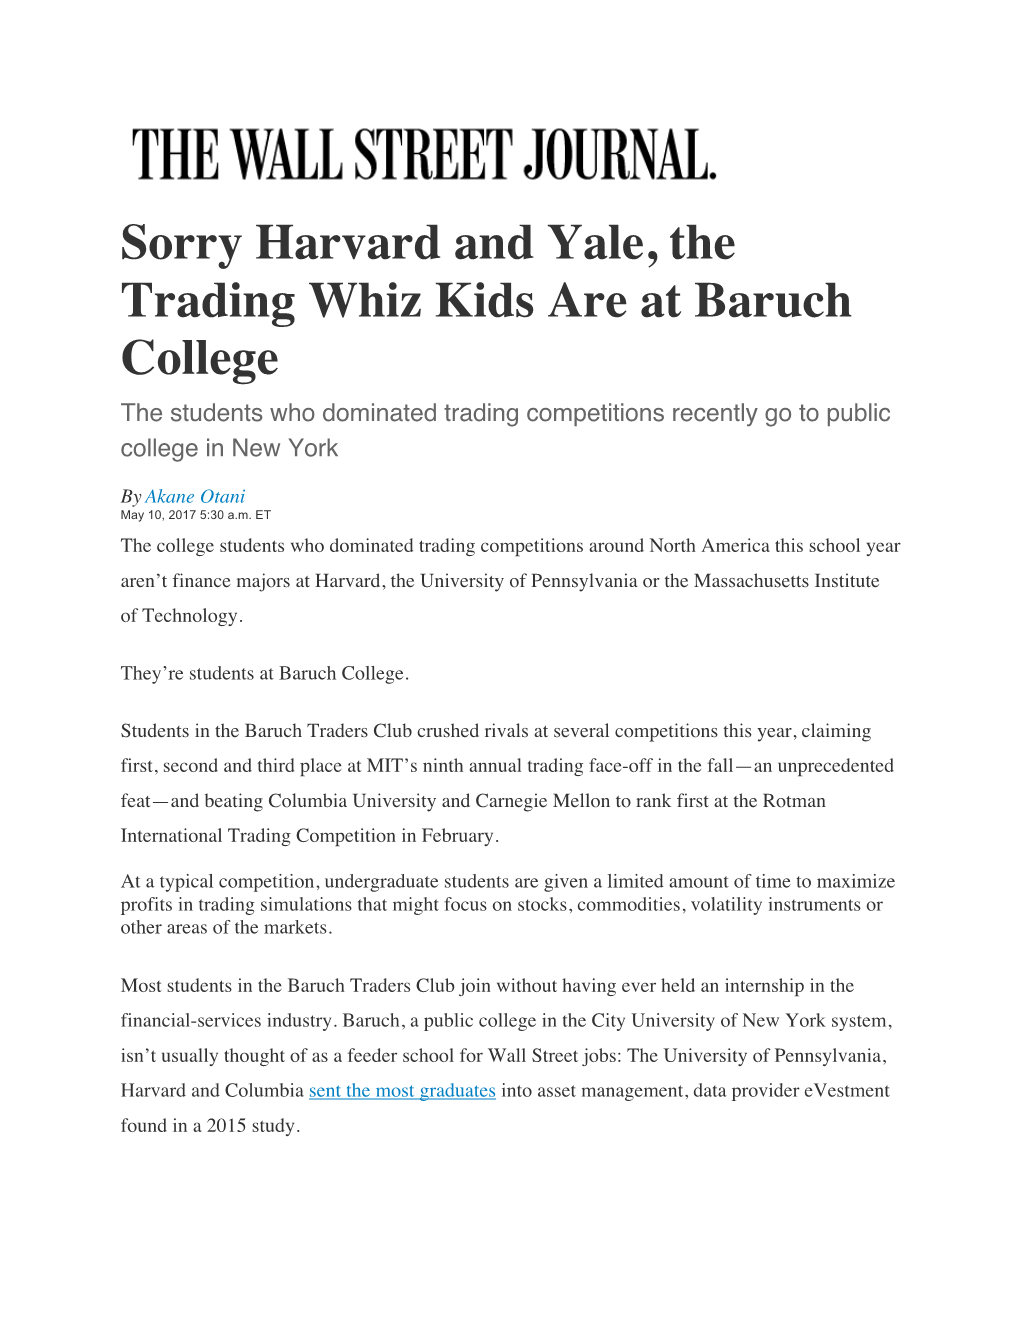 Sorry Harvard and Yale, the Trading Whiz Kids Are at Baruch College the Students Who Dominated Trading Competitions Recently Go to Public College in New York